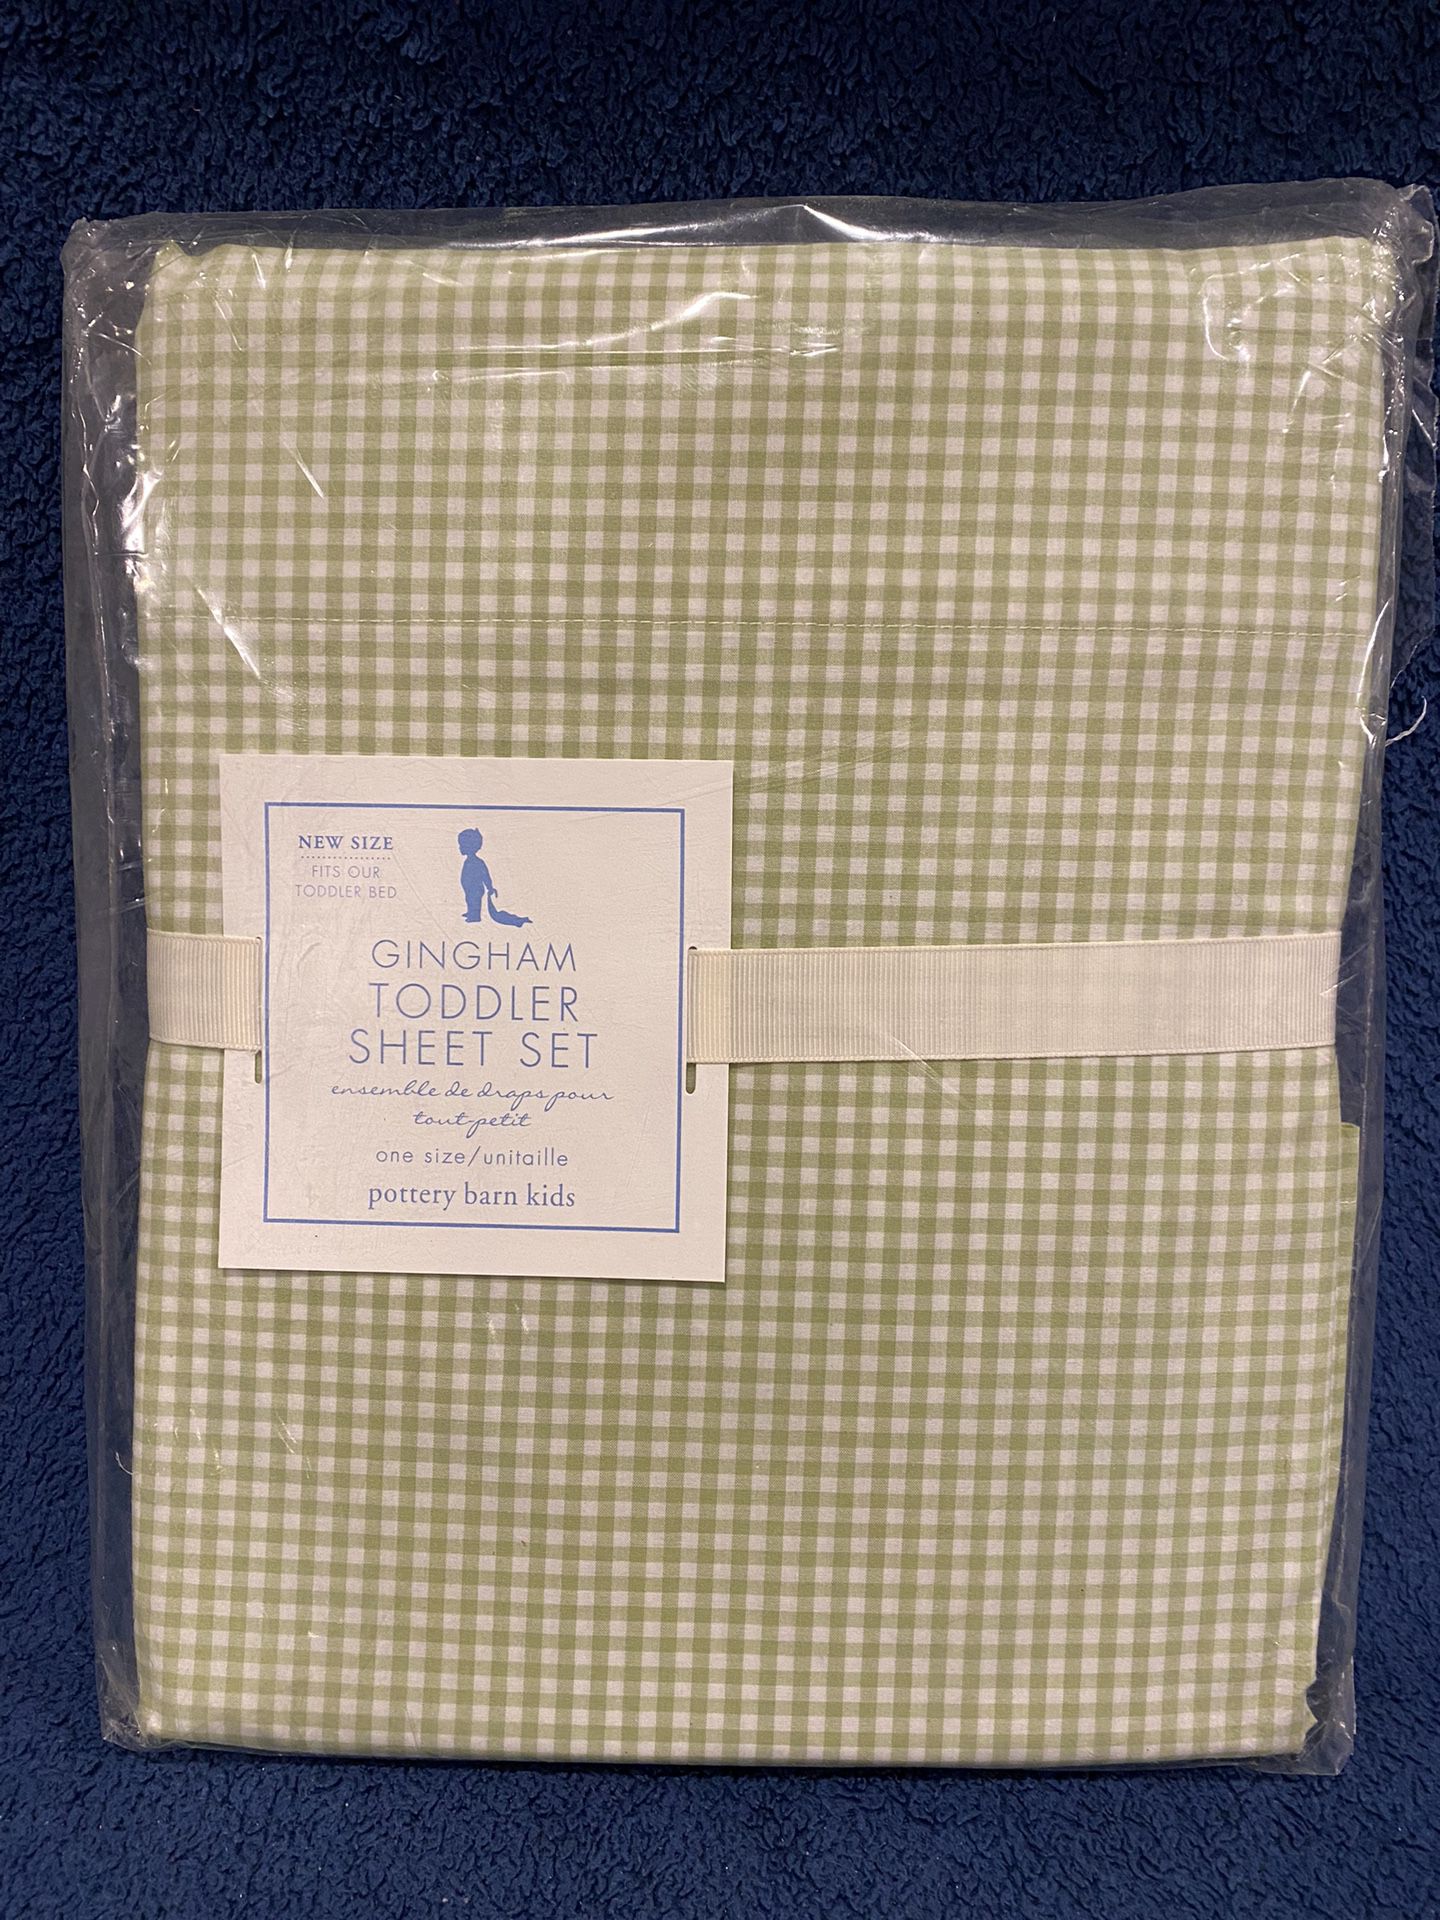 NEW Pottery Barn Kids Sage Green Gingham Toddler Sheet Set. Includes Flat, Fitted and Pillow Case 100% Cotton Made in Portugal 